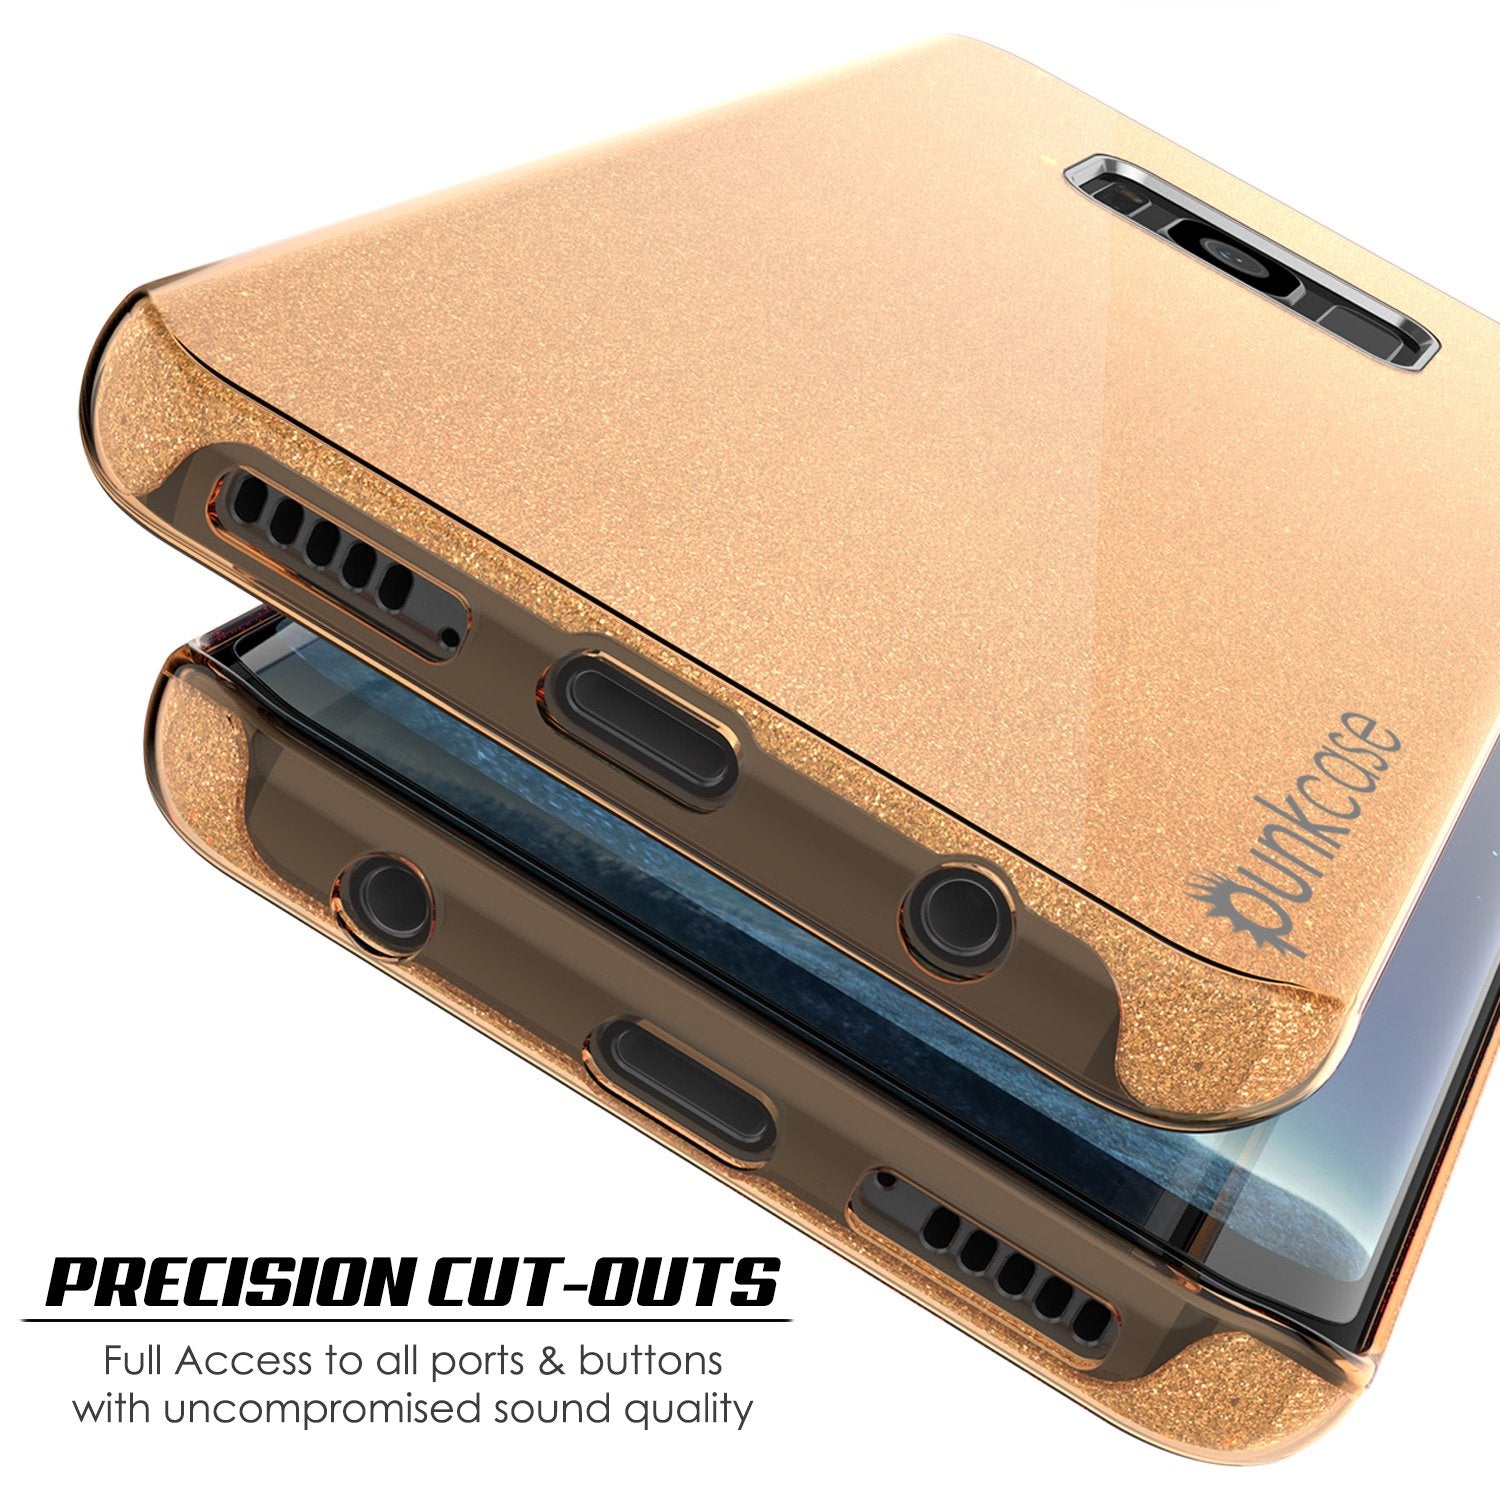 Galaxy S8 Plus Case, Punkcase Galactic 2.0 Series Ultra Slim Protective Armor TPU Cover [Gold]